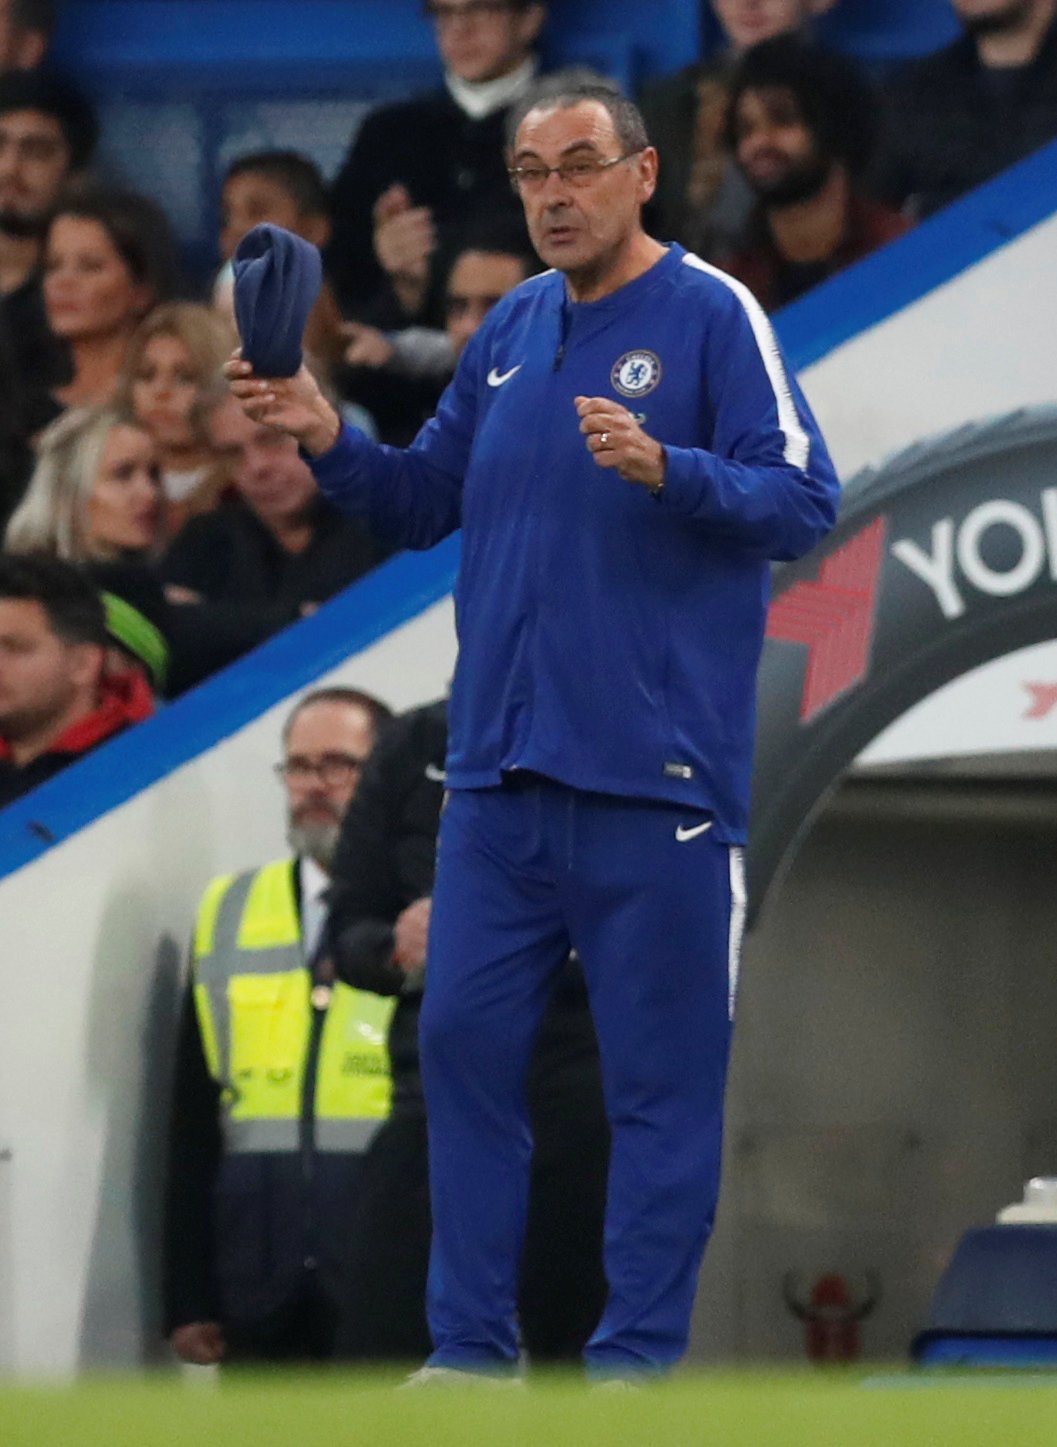 Sarri says that Chelsea are lucky to keep winning